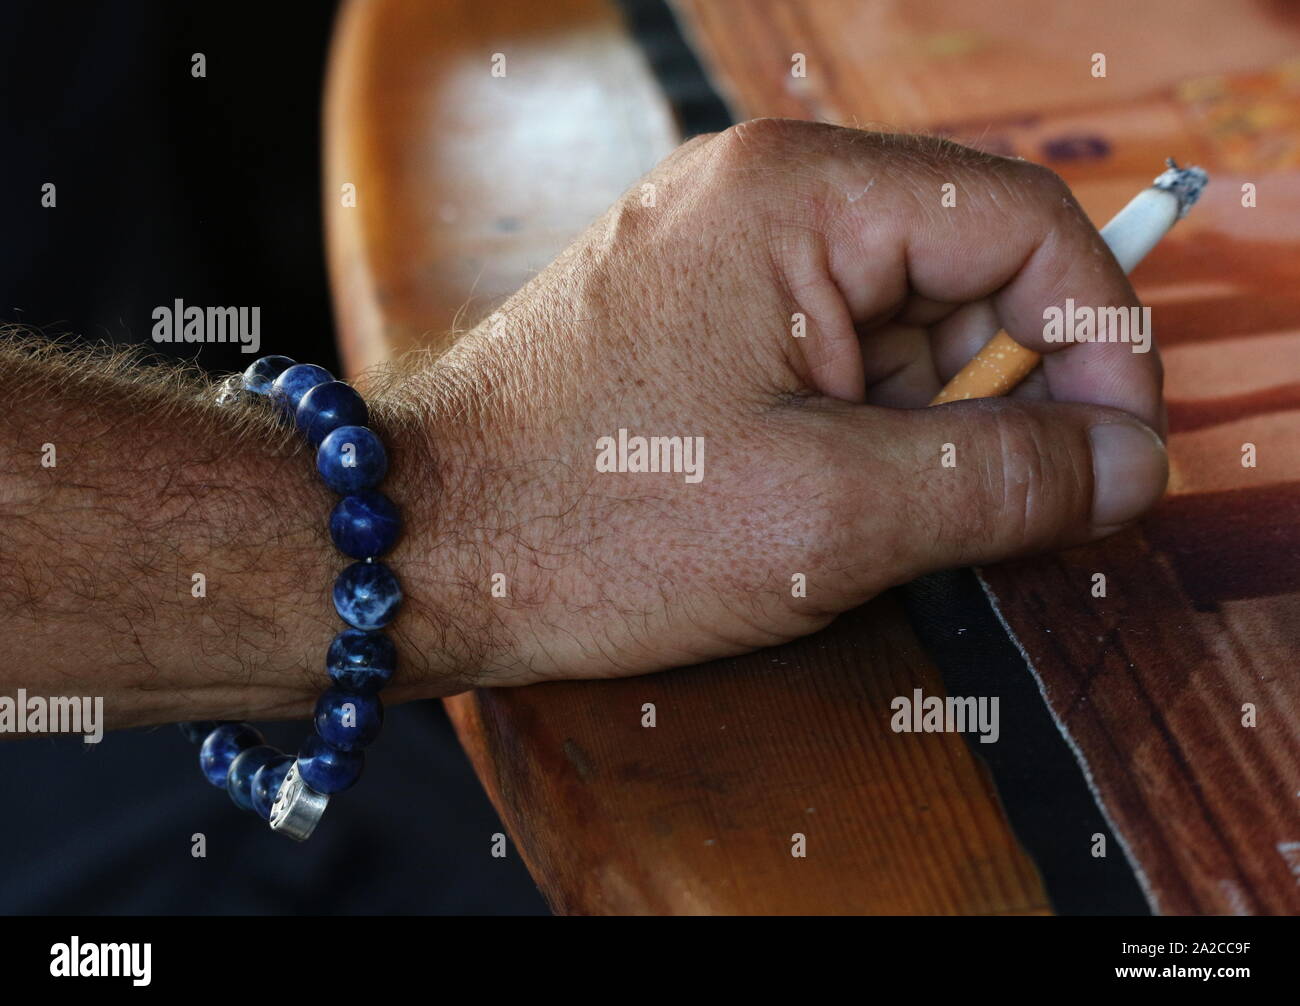 Close up of man's hand holding lit cigarette on a wood bar Stock Photo